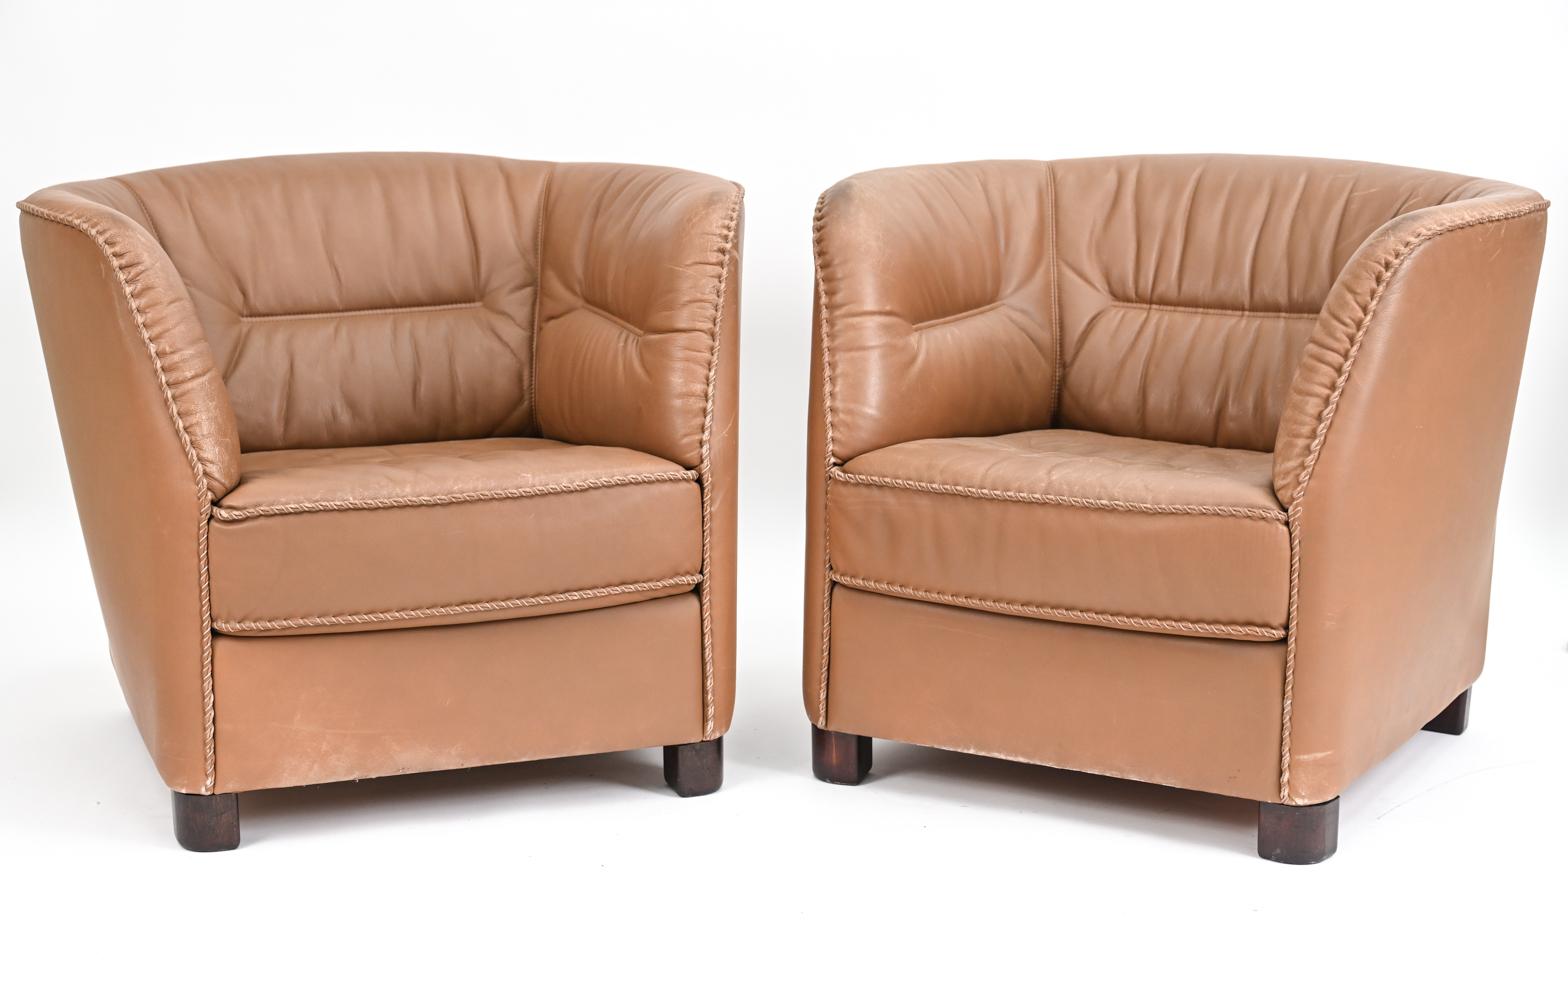 Pair of Danish Modern Leather Whipstitched Lounge Chairs by Berg Furniture 4